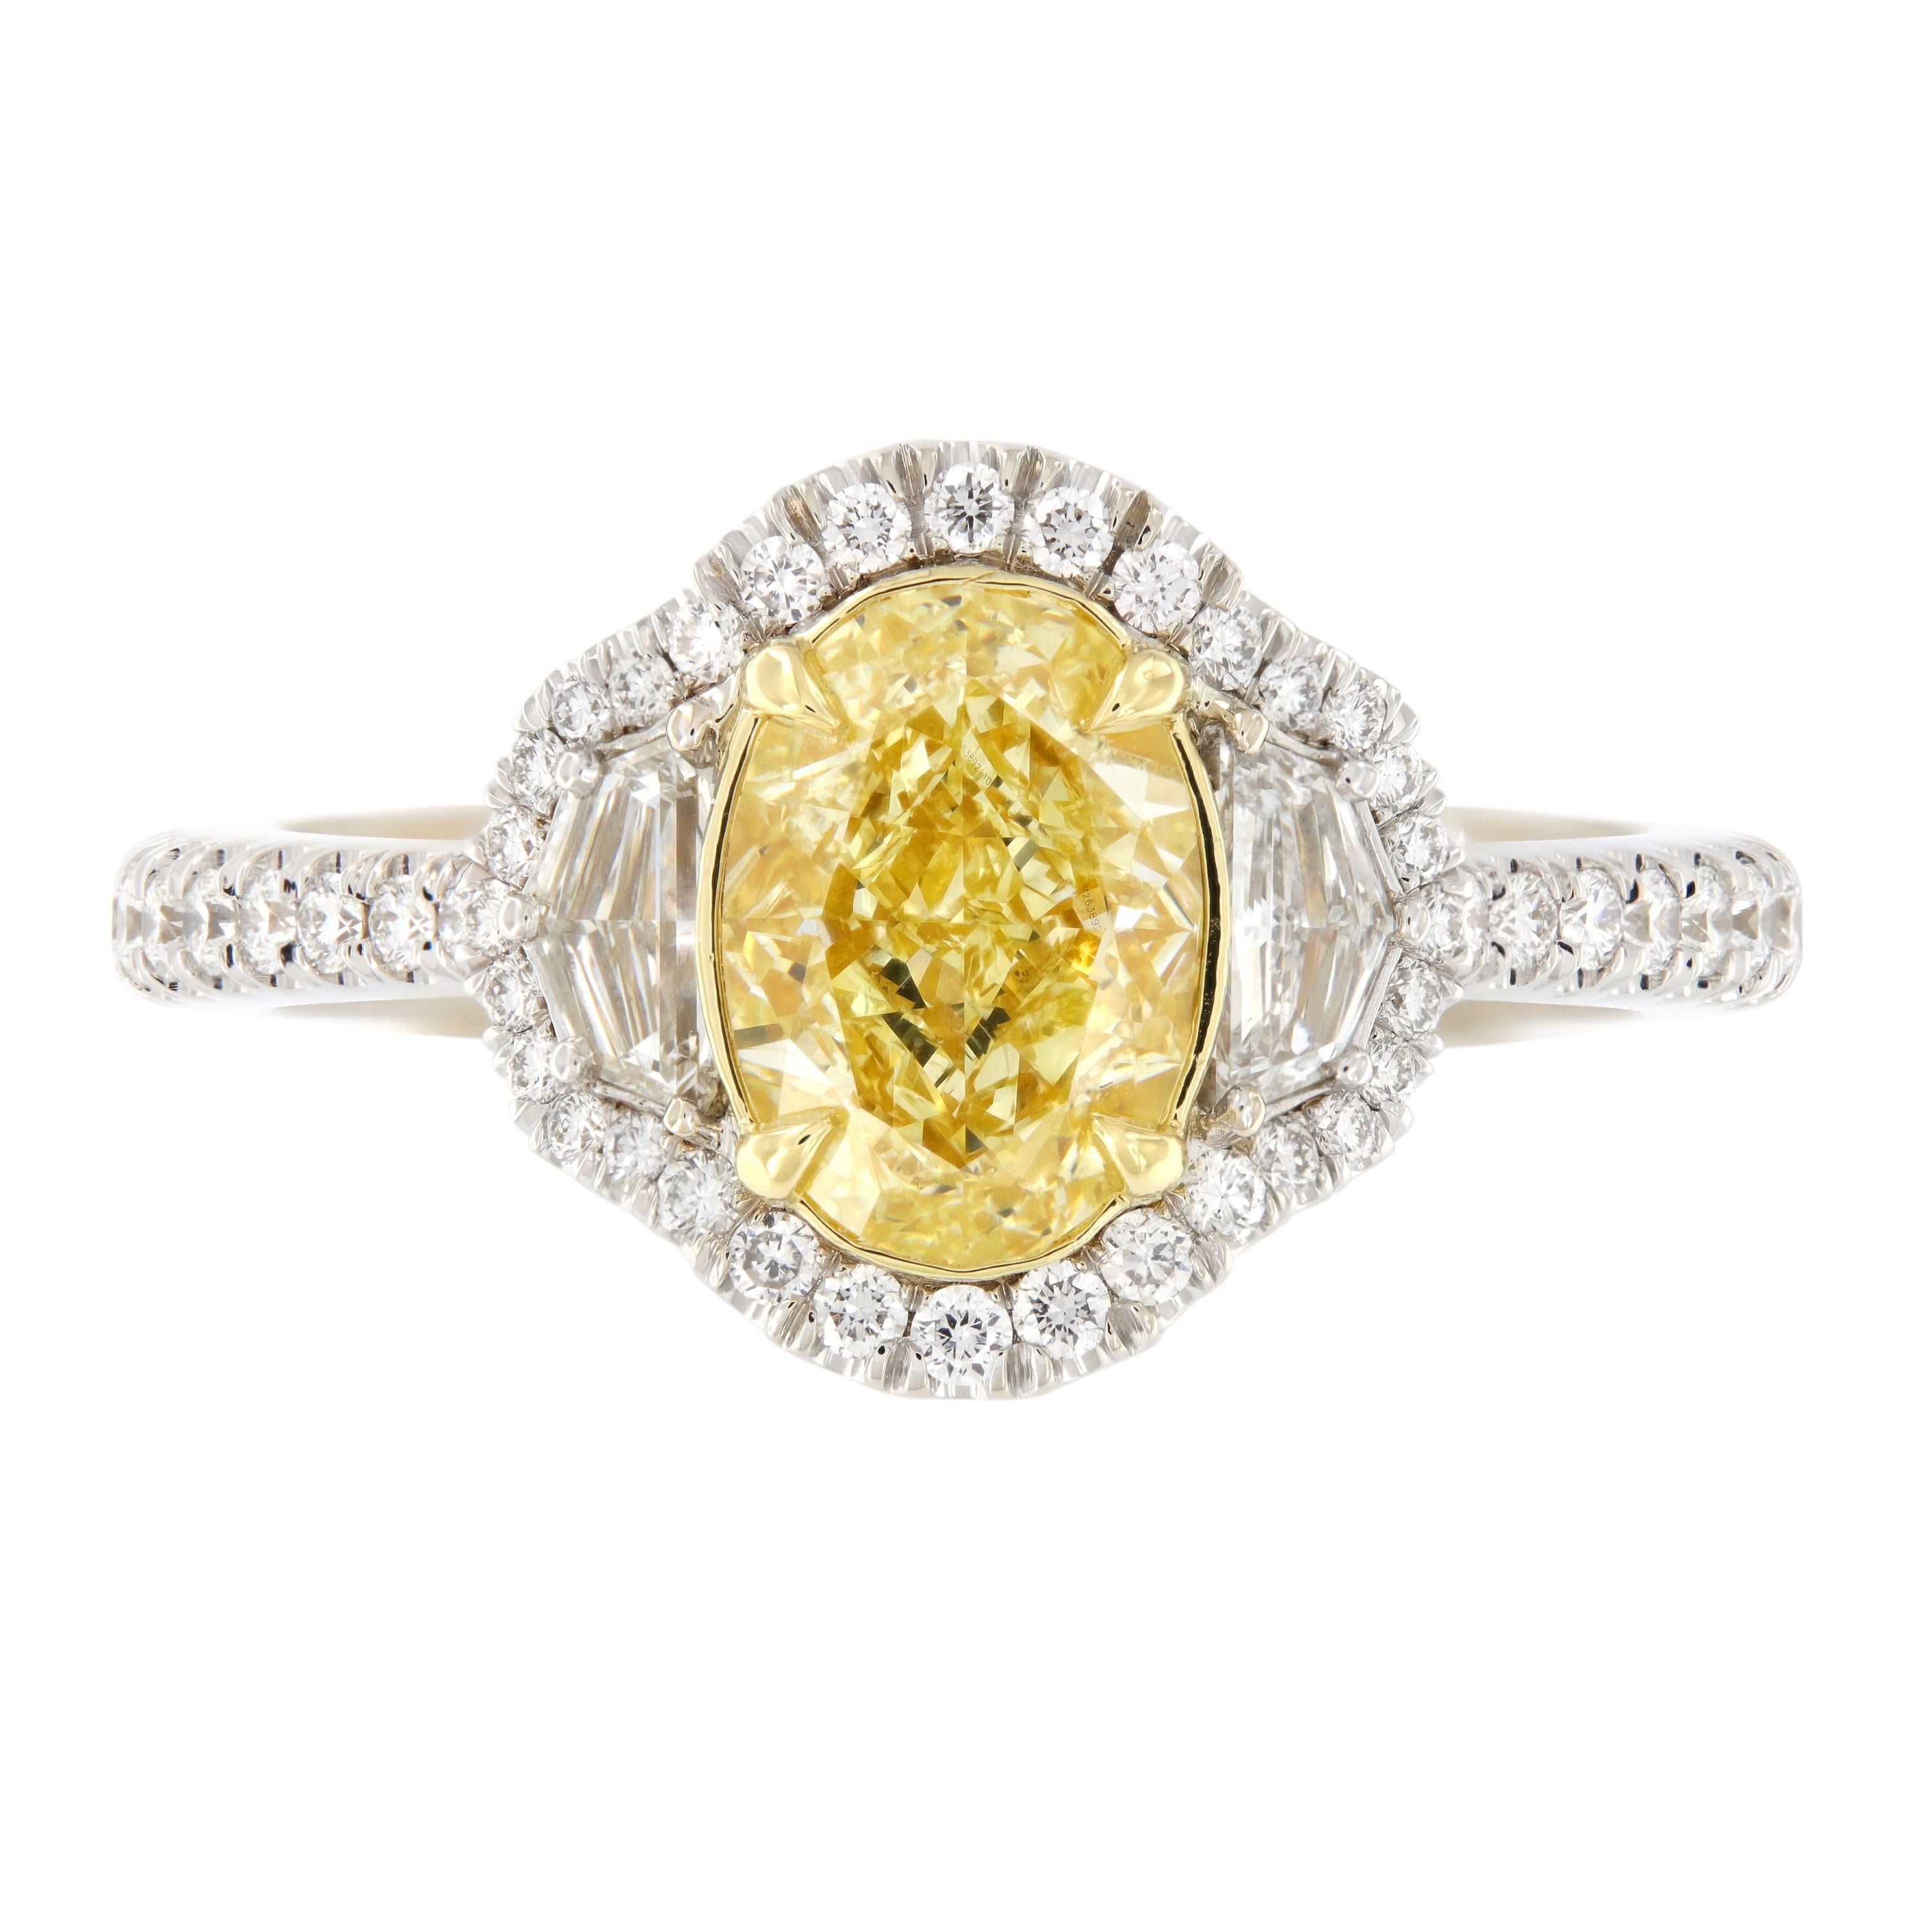 GIA Certified 1.40 Carat Fancy Yellow and White Diamond Ring